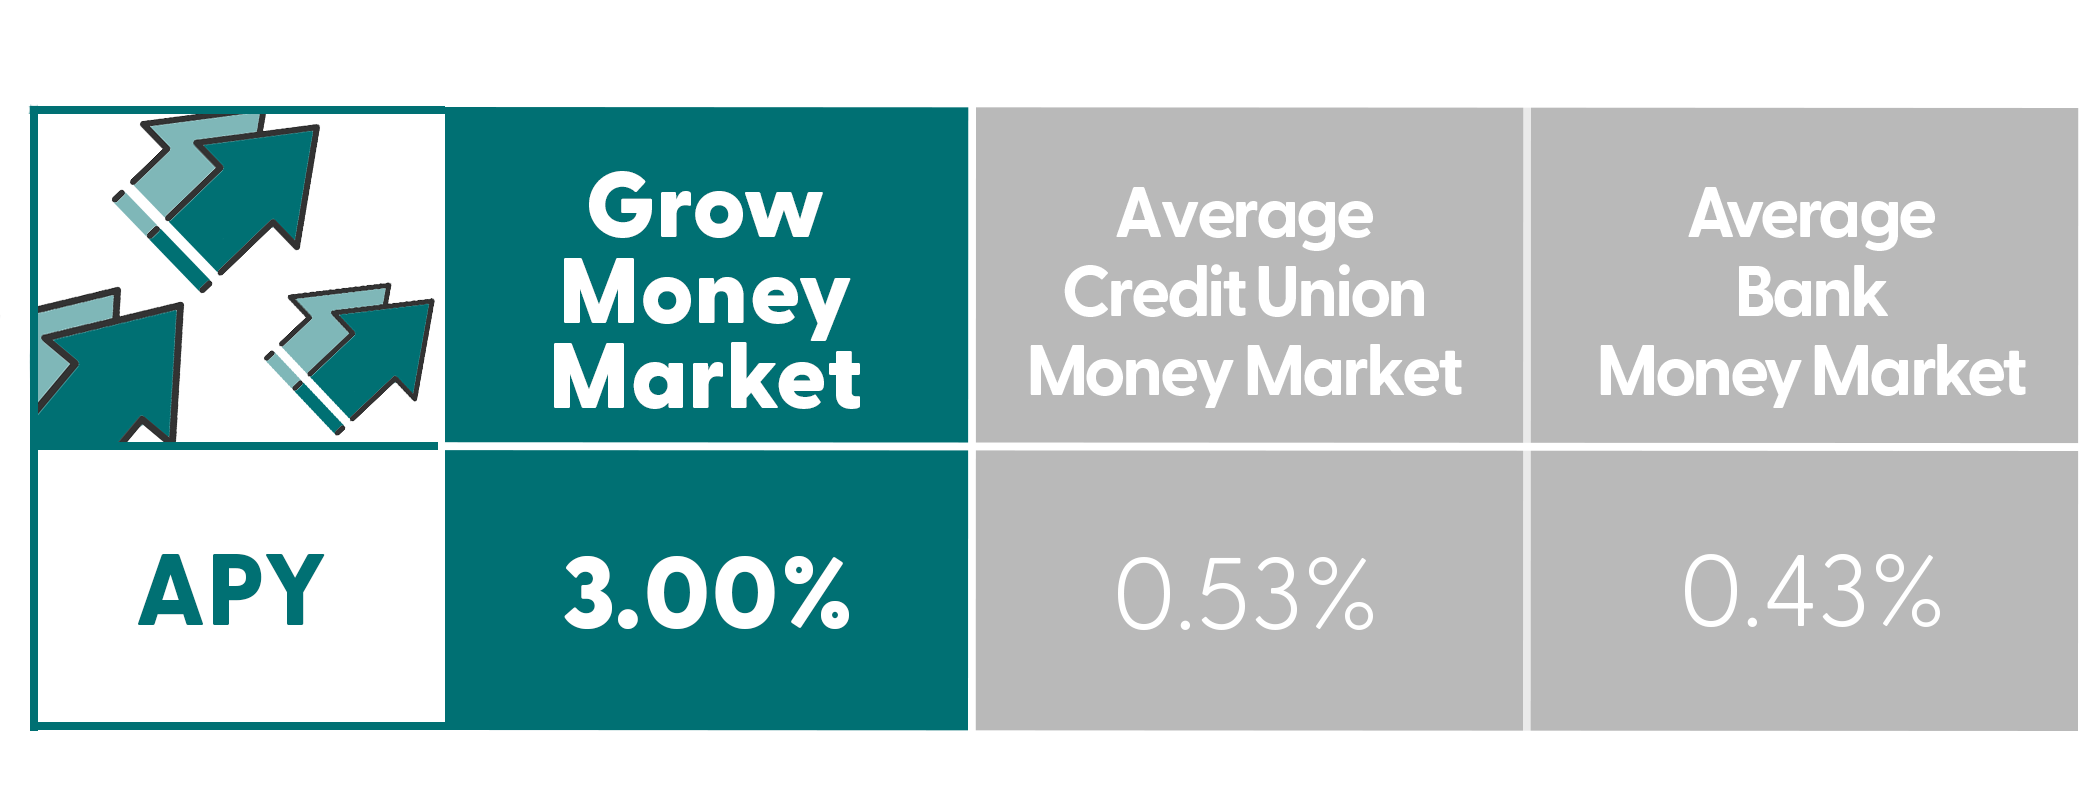 Earn 3.00% APY with the Sandia Area Grow Money Market Account Bonus Rate! Compare to the National Average and see how you can start saving today.